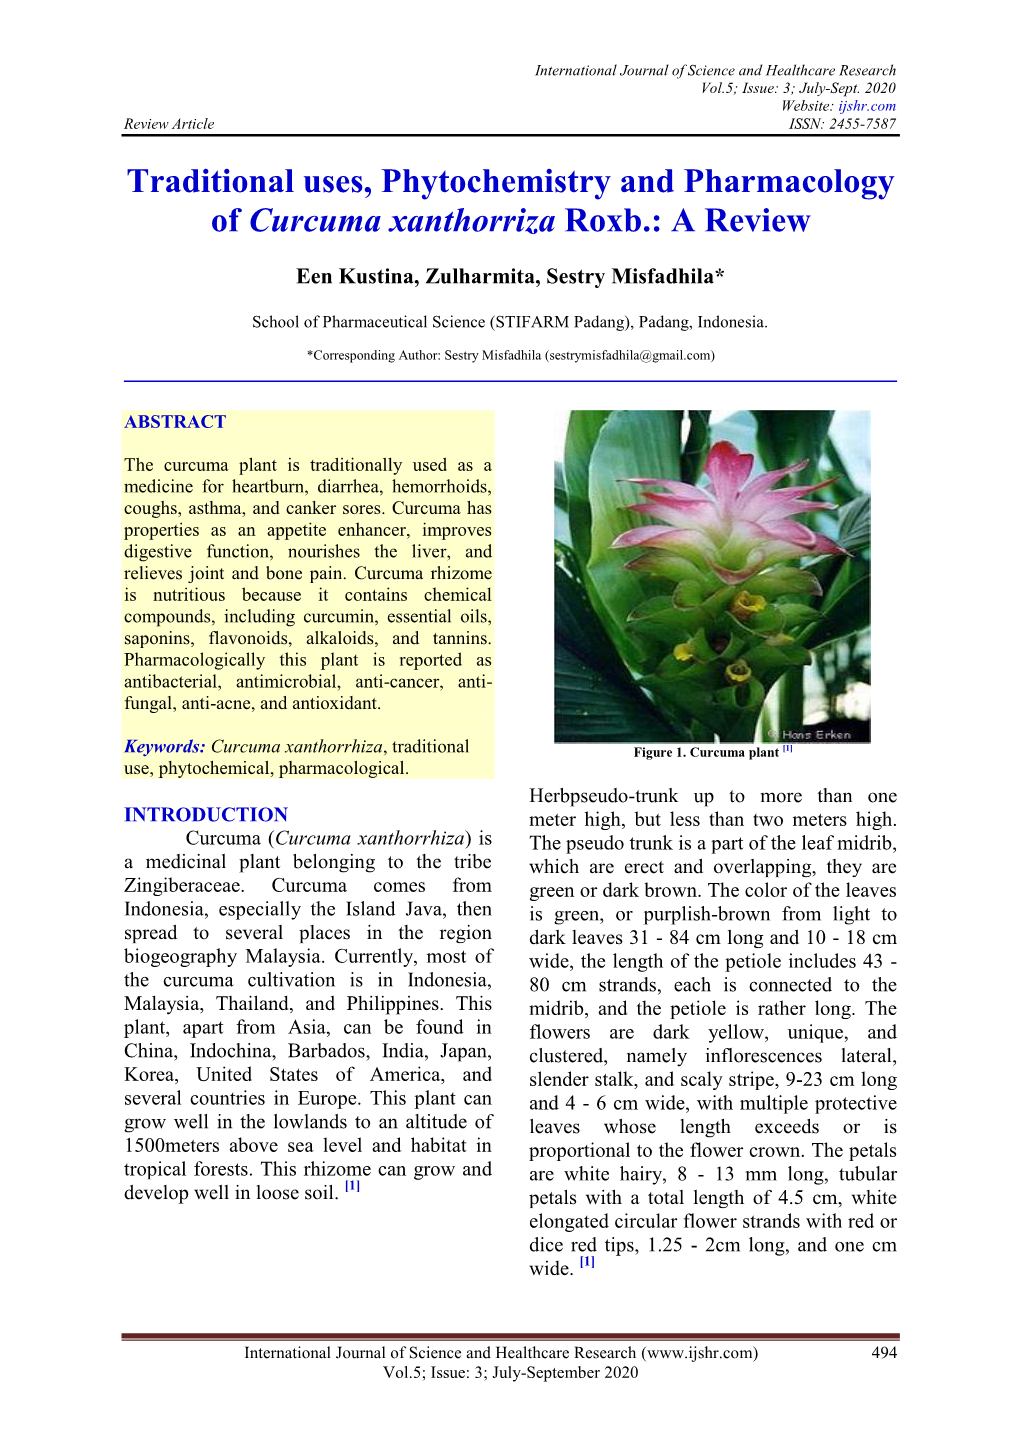 Traditional Uses, Phytochemistry and Pharmacology of Curcuma Xanthorriza Roxb.: a Review